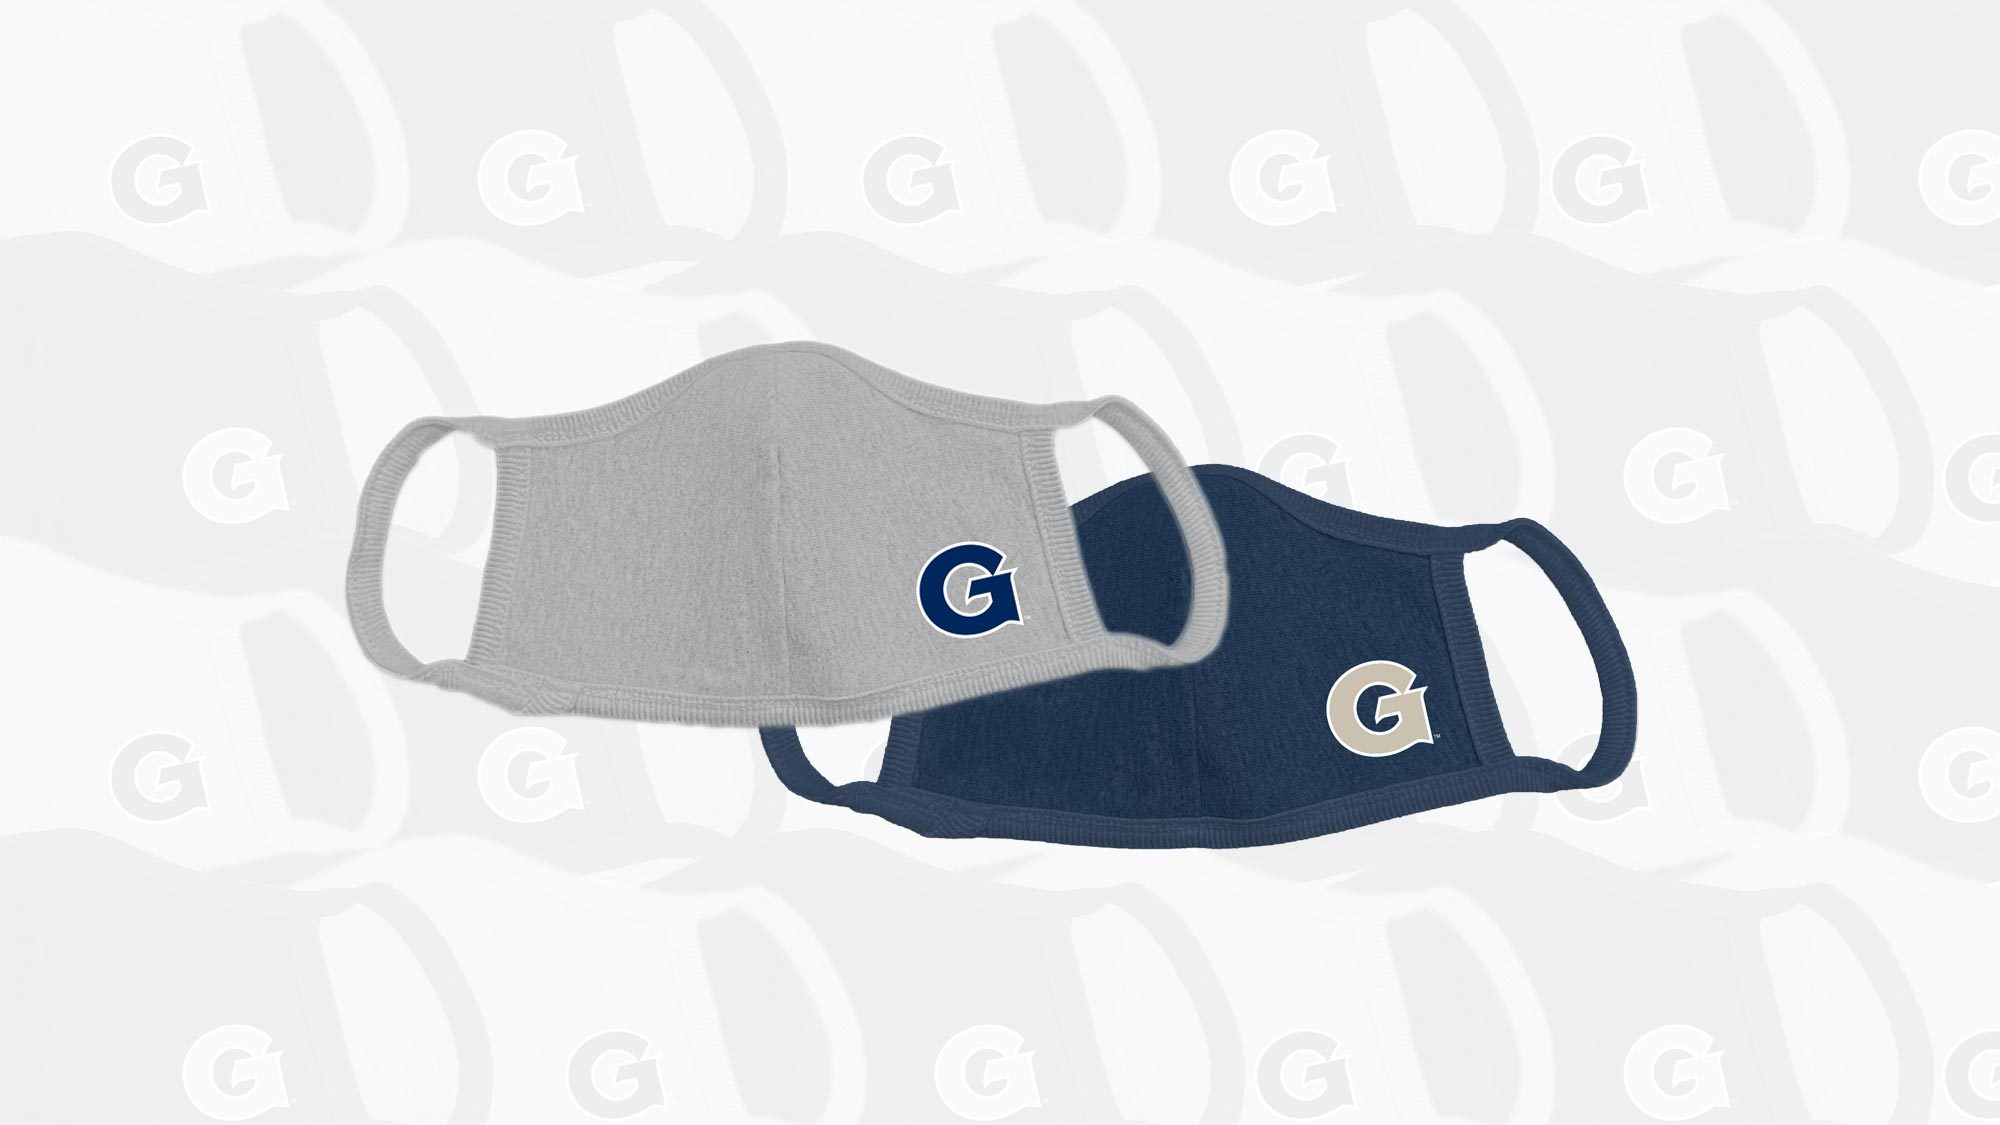 Two masks with Medstar Health and the G for Georgetown on them